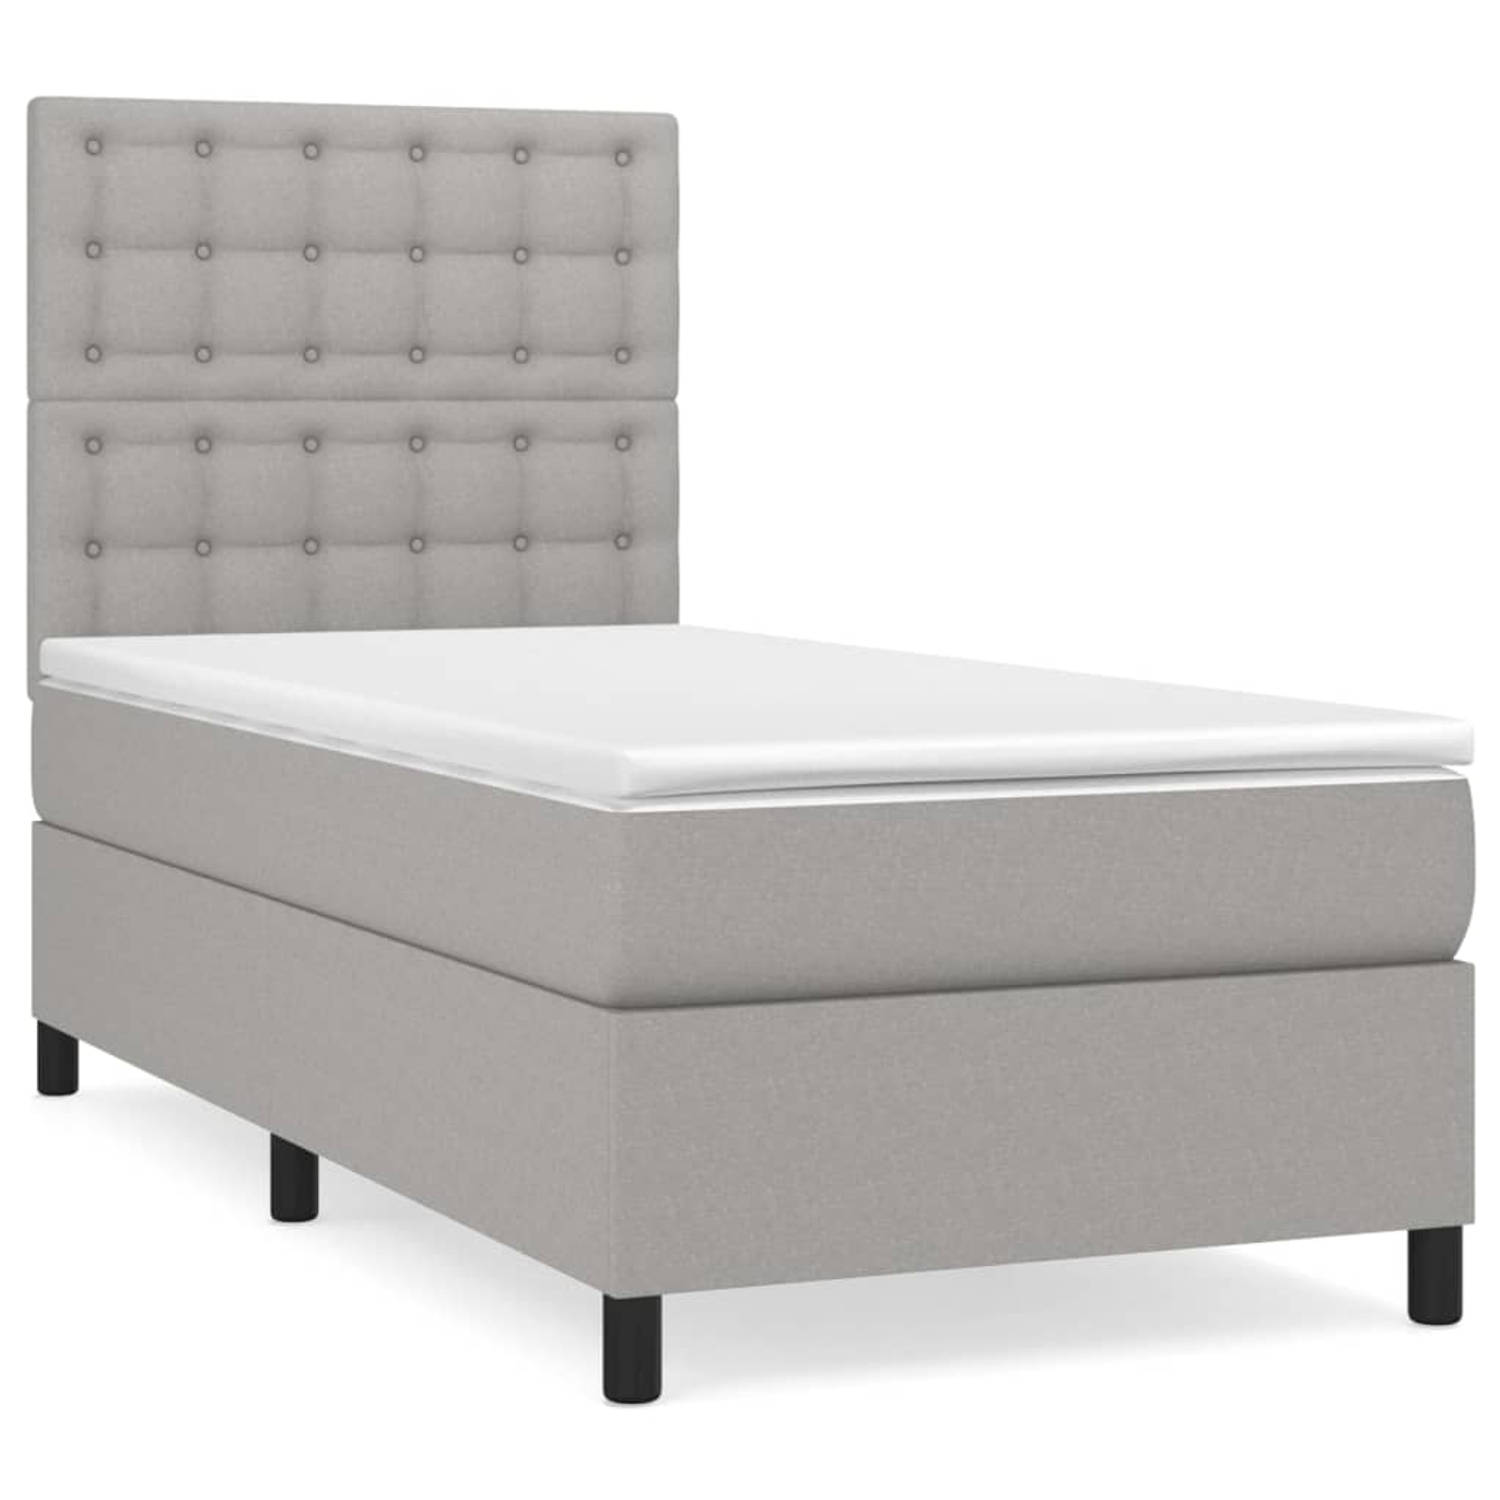 The Living Store Boxspringbed - bed - Bed - 203 x 83 x 118/128 cm - Lichtgrijs